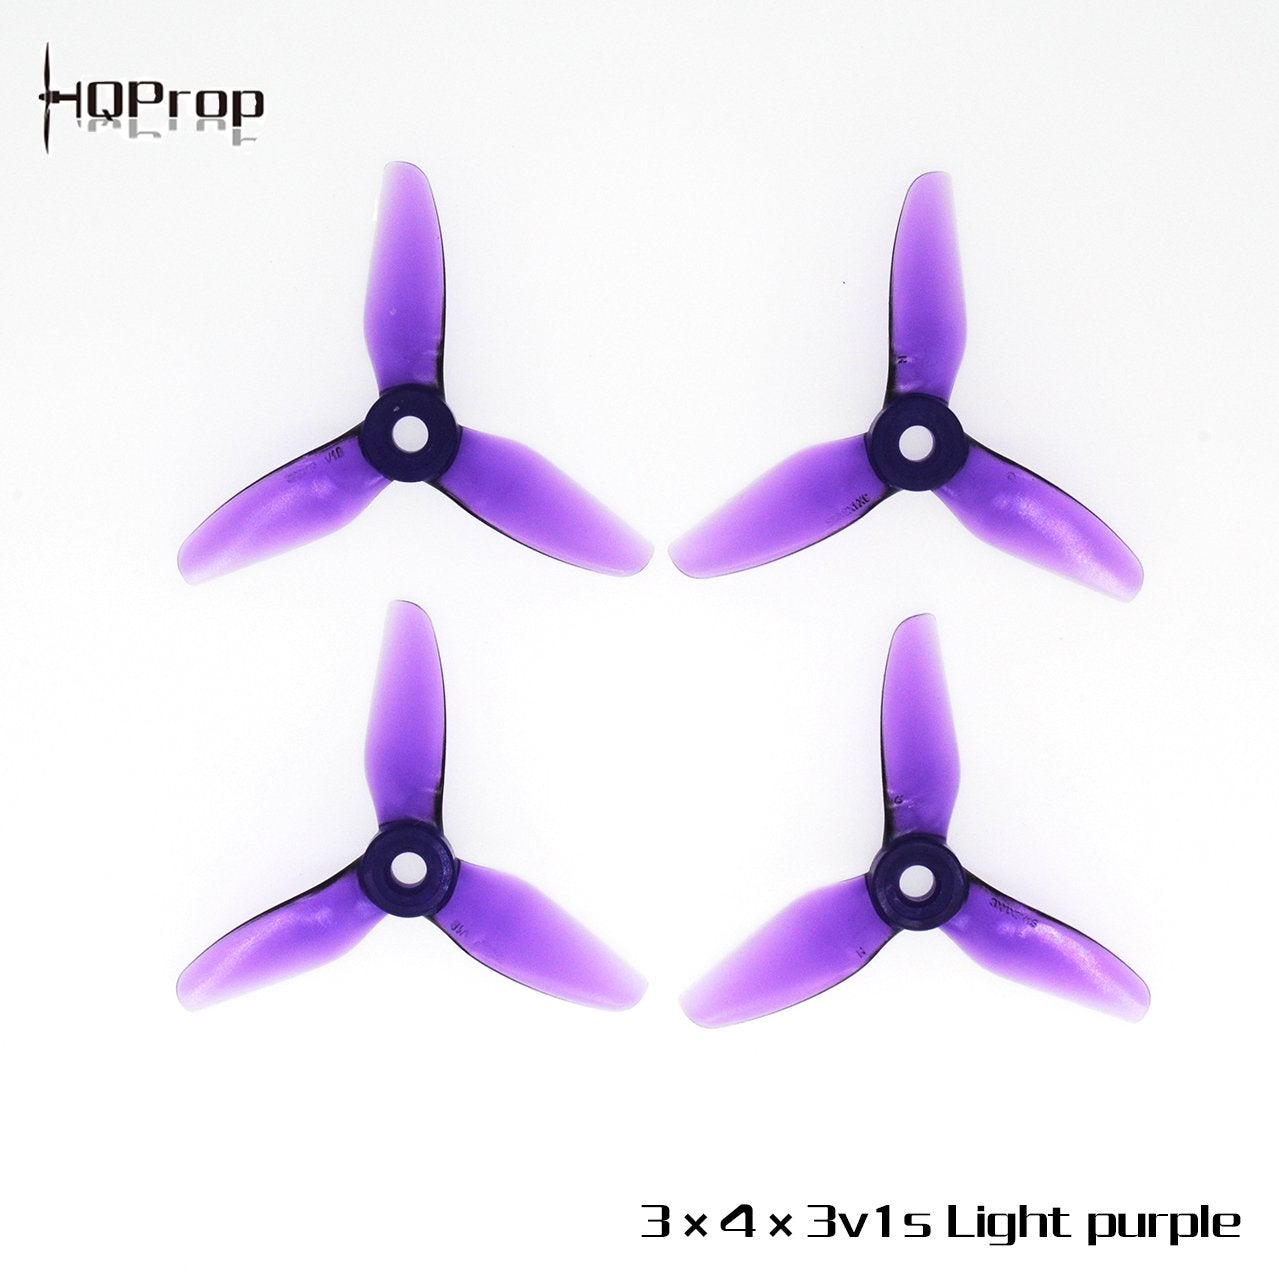 HQProp 3X4X3V1S Tri-Blade 3 inch Propellers 6 - HQProp - Drone Authority